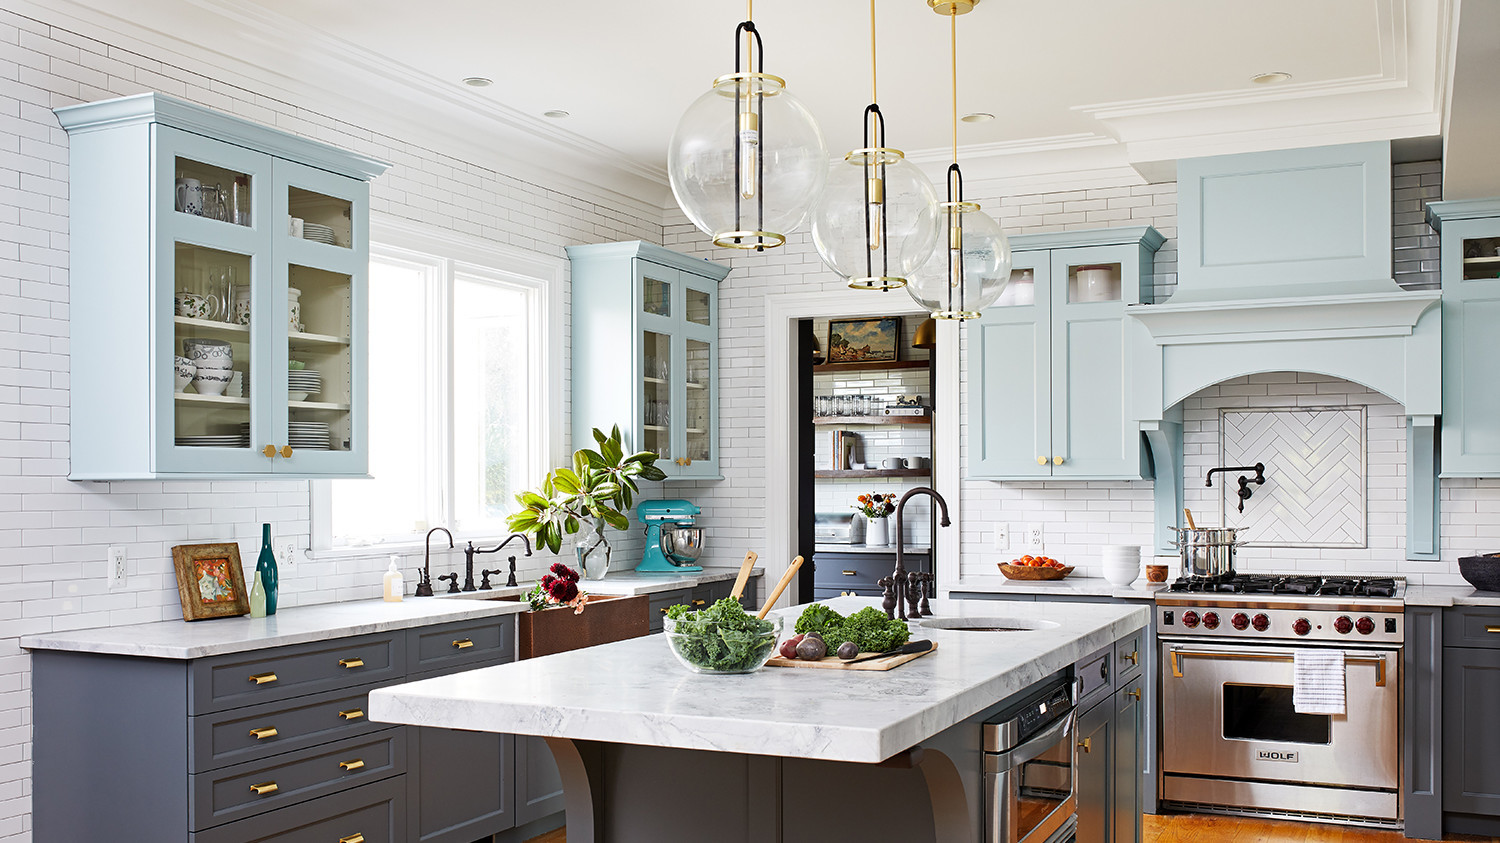 This Gorgeous Kitchen Renovation Was Designed to Be Family-Friendly ...